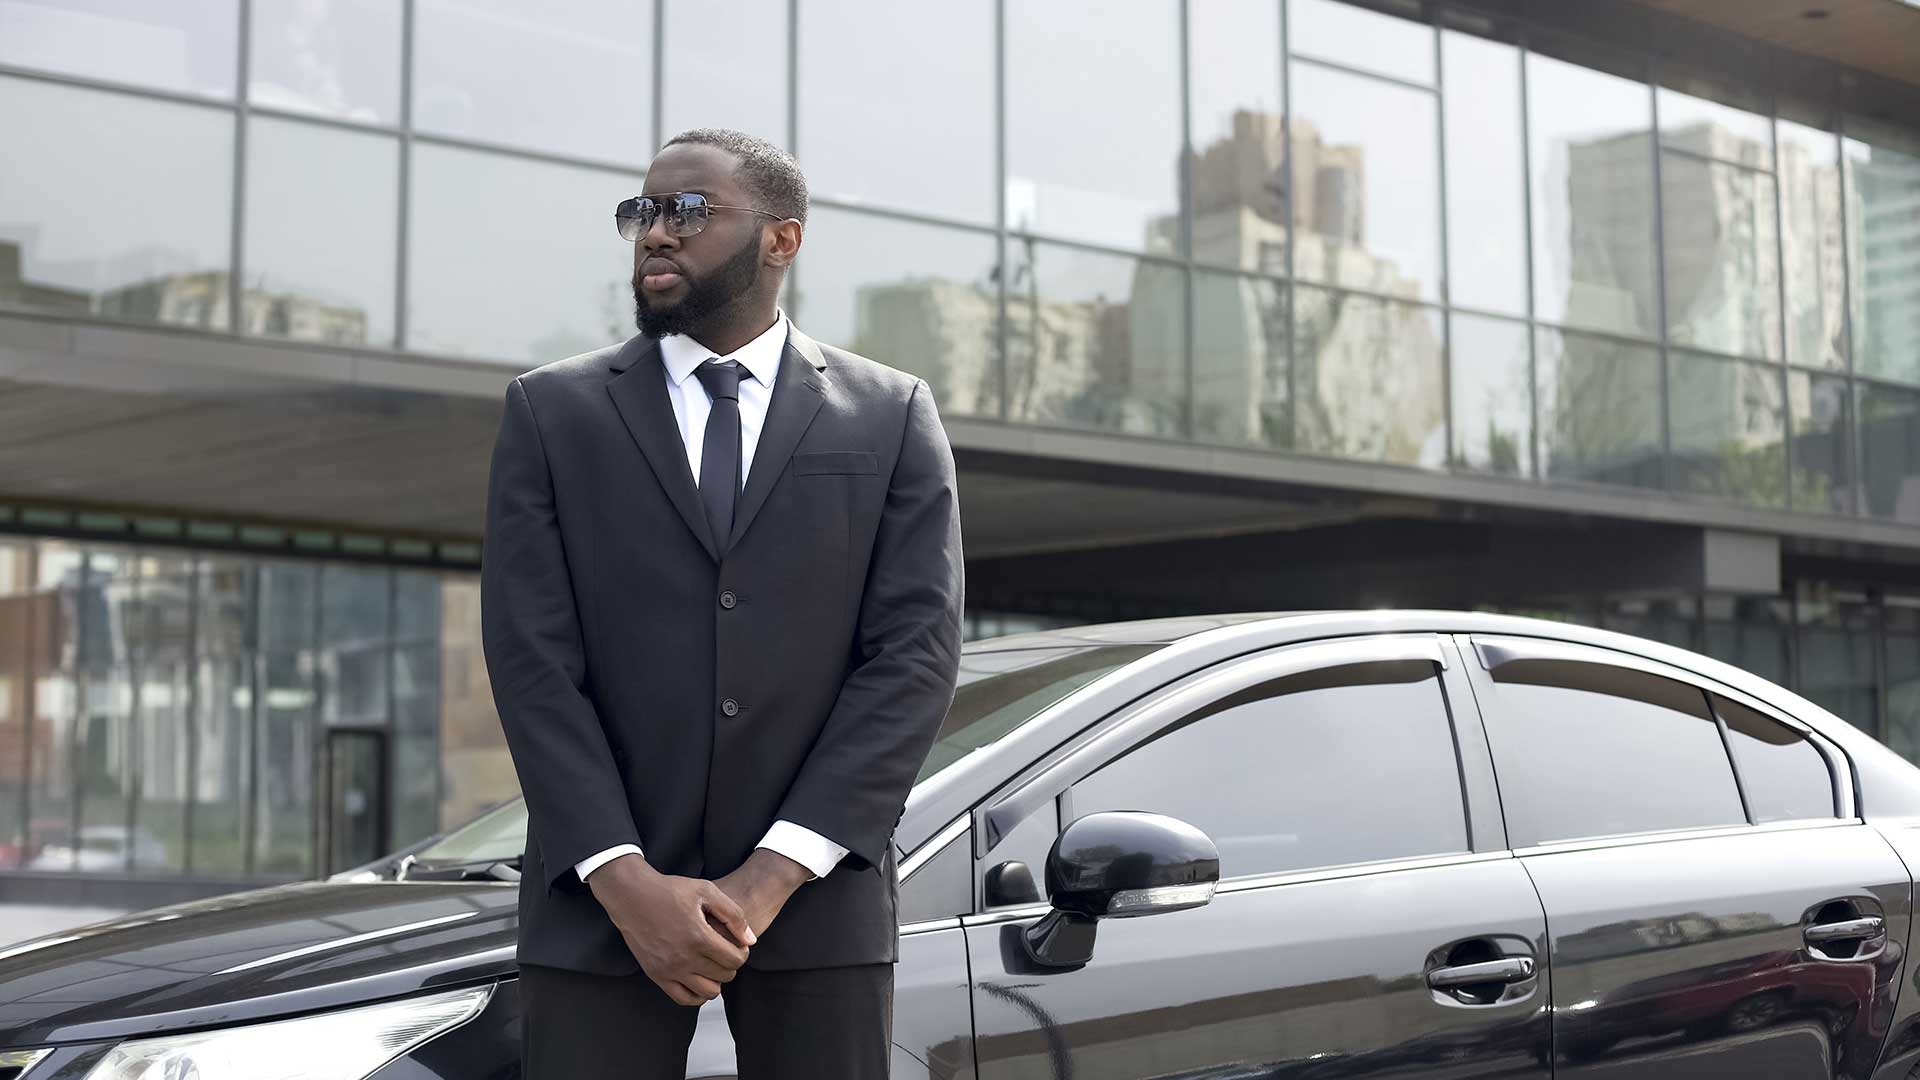 Bodyguard in a suit standing in front of a town car parked in front of an office building